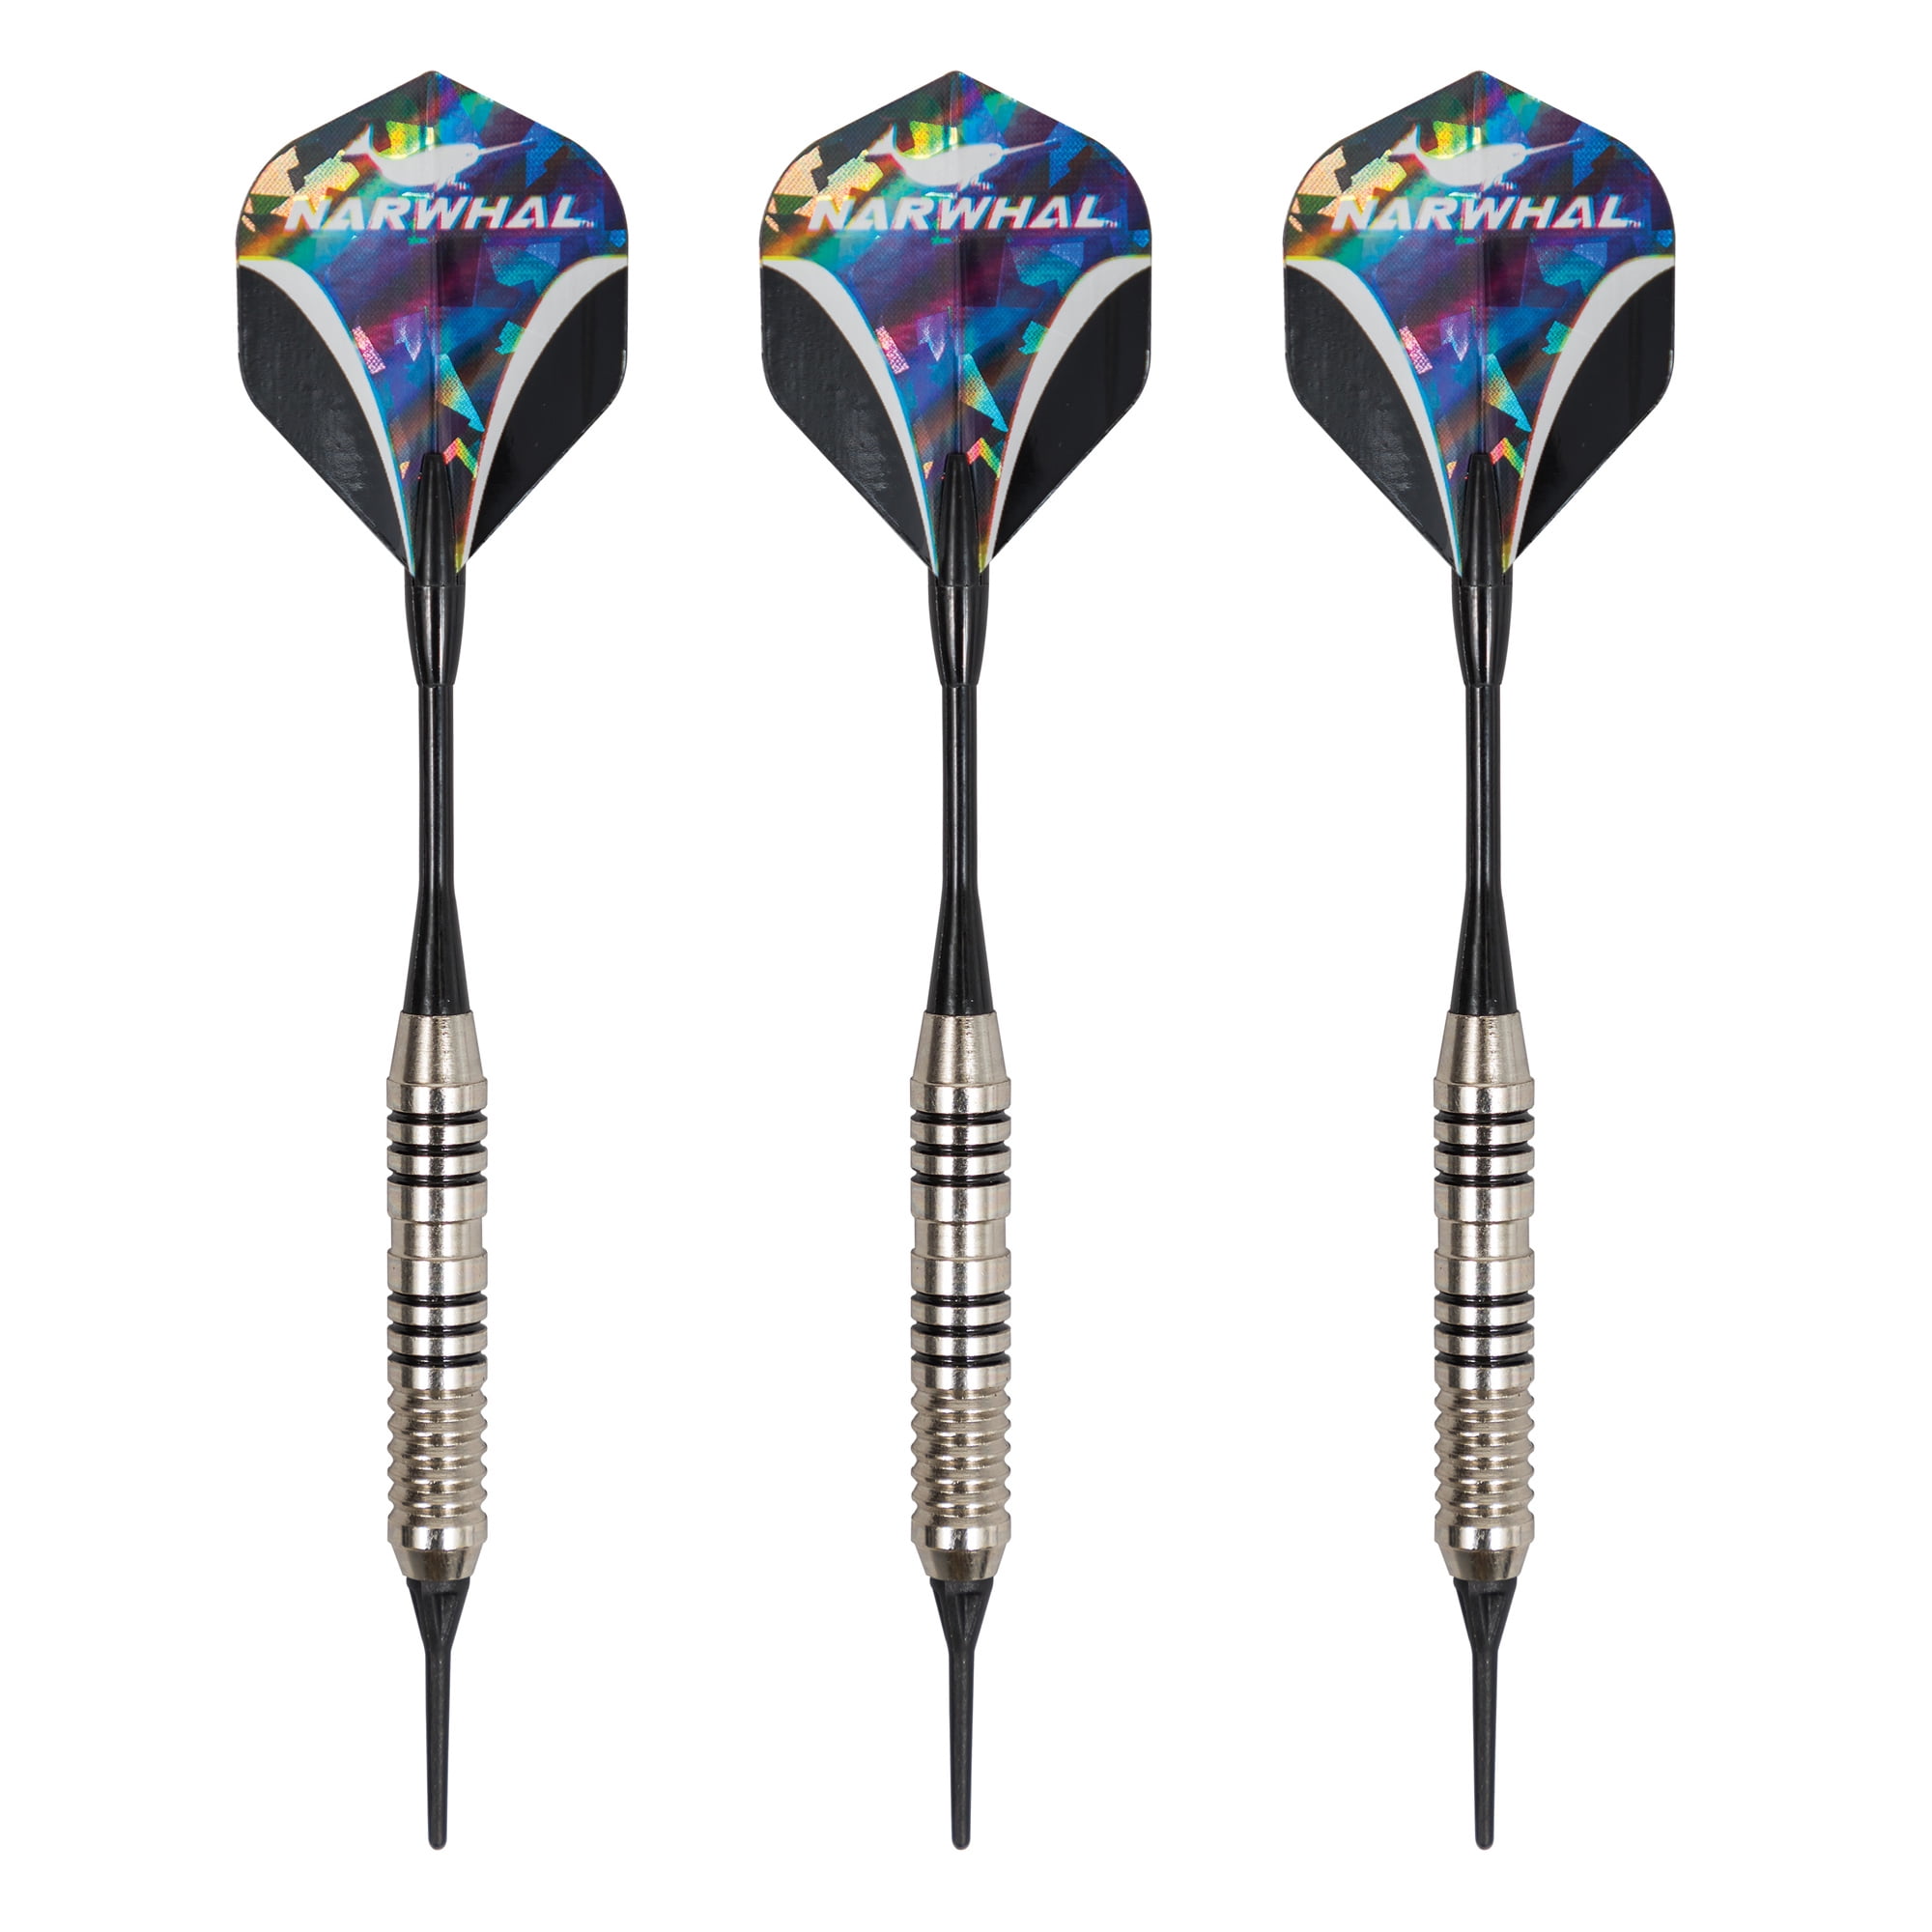 Narwhal Tournament Soft Tip Darts (18g) with Deluxe Storage Case, 3 Pack